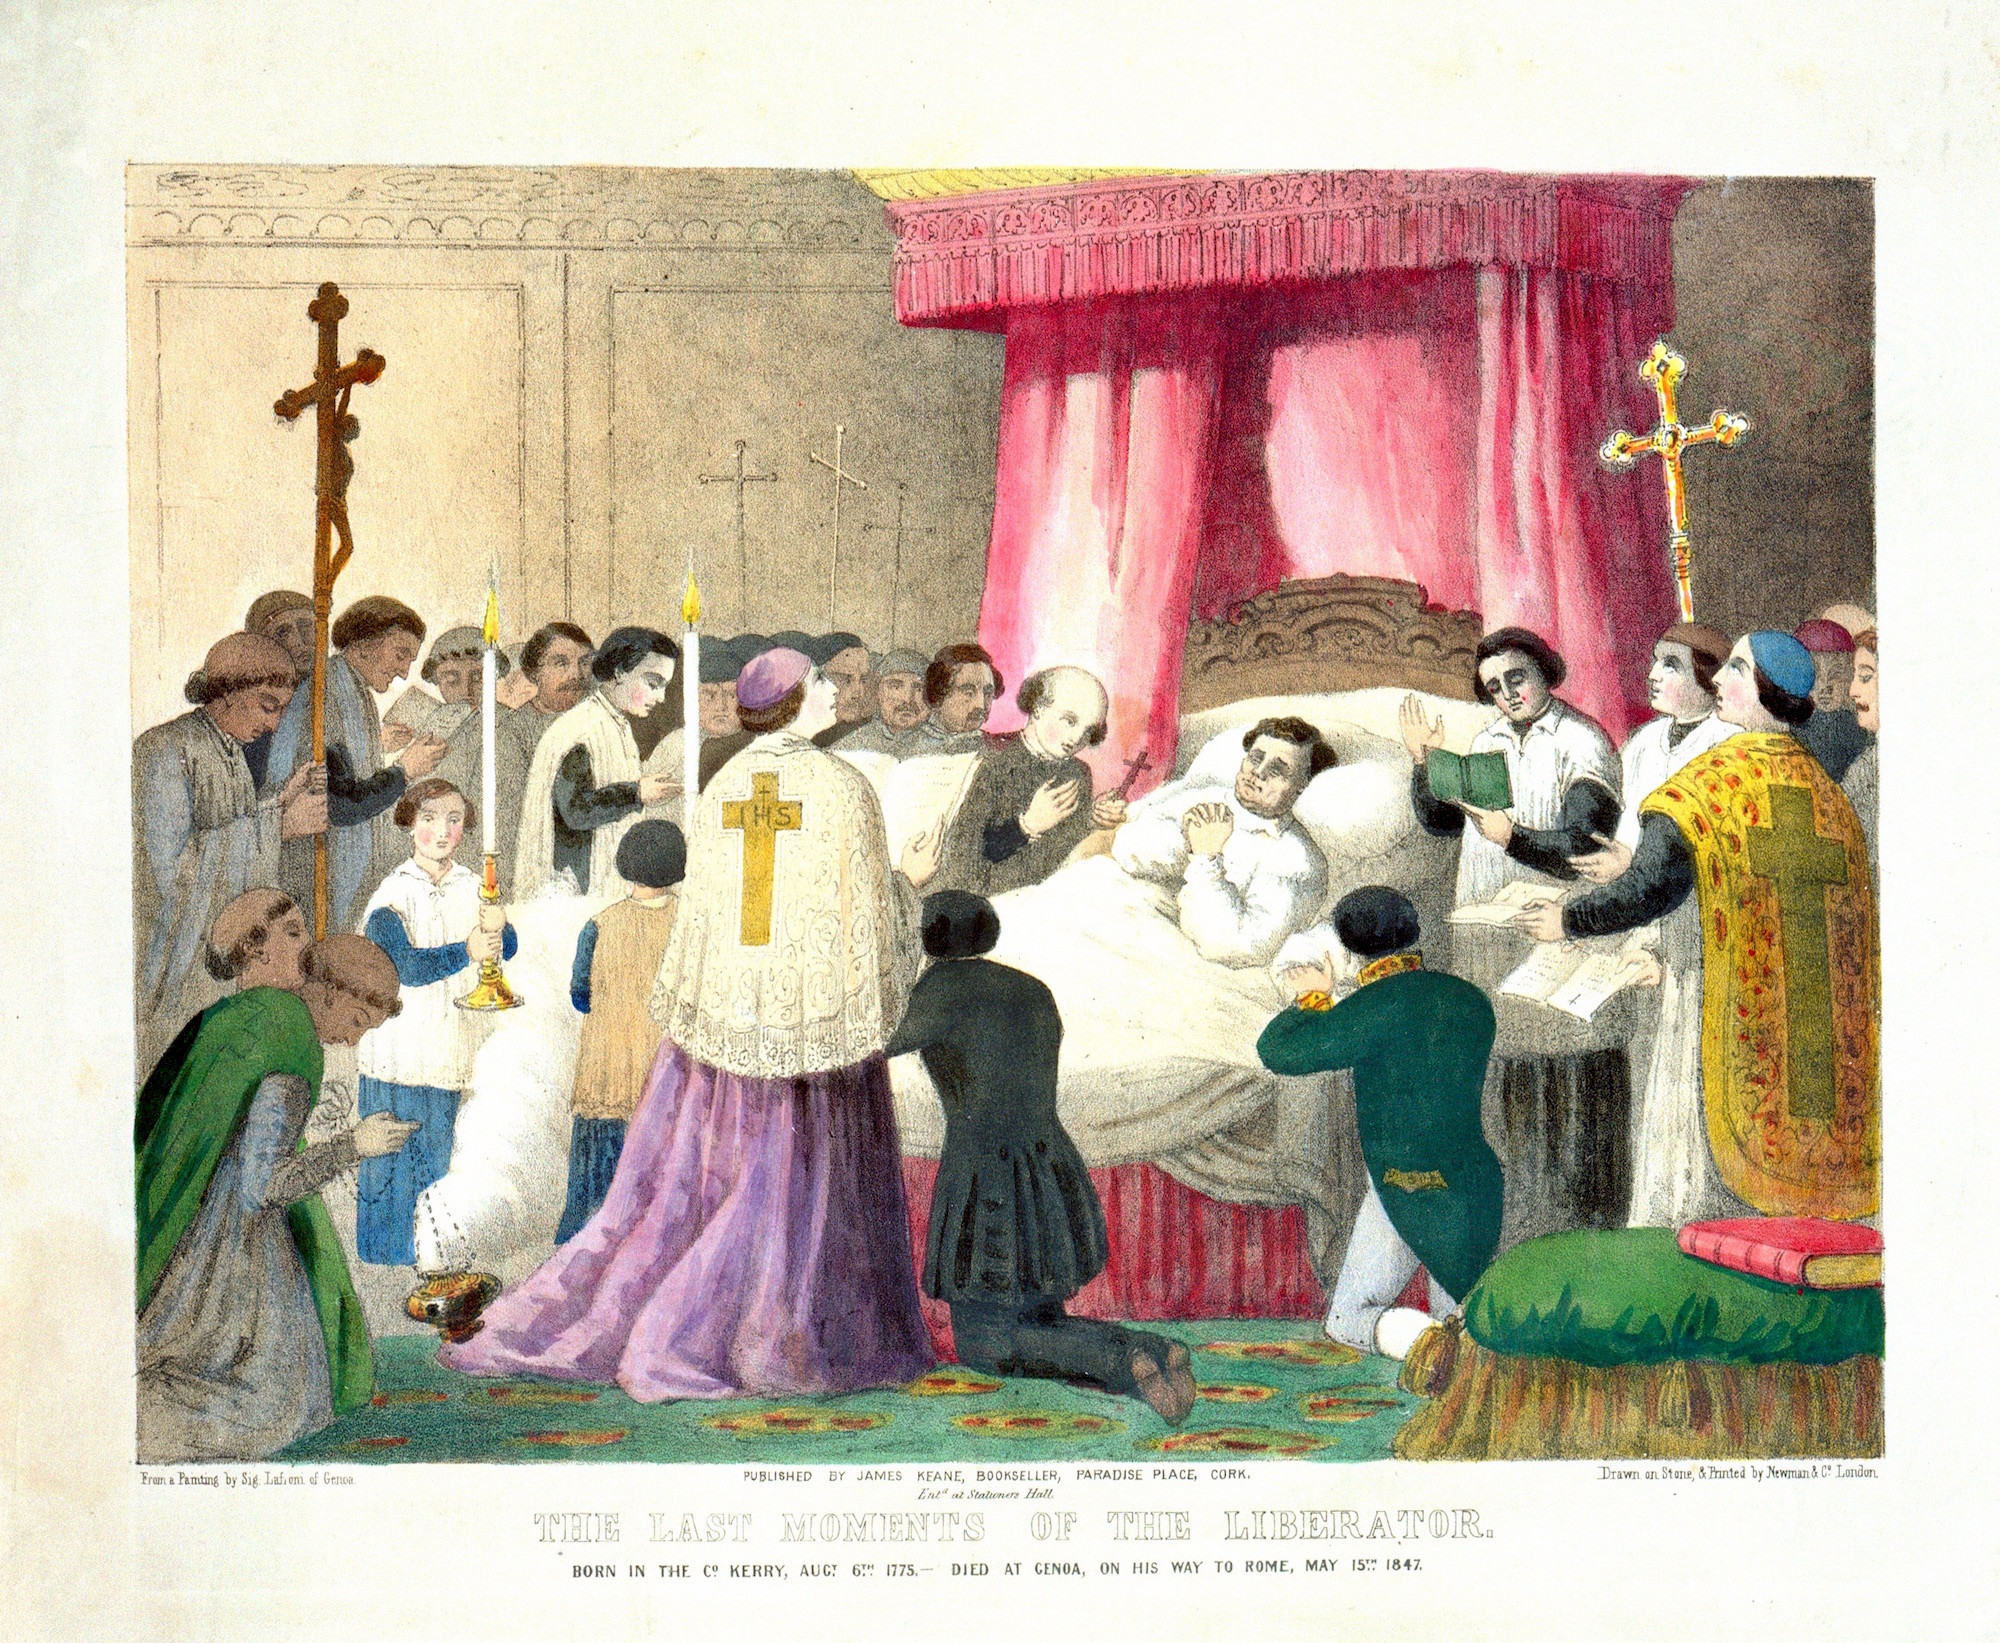 Daniel O'Connell on his deathbed and being given the last rites. He is surrounded by members of the clergy. From a painting by Sig. Lafroni of Genoa. National Library of Ireland. 